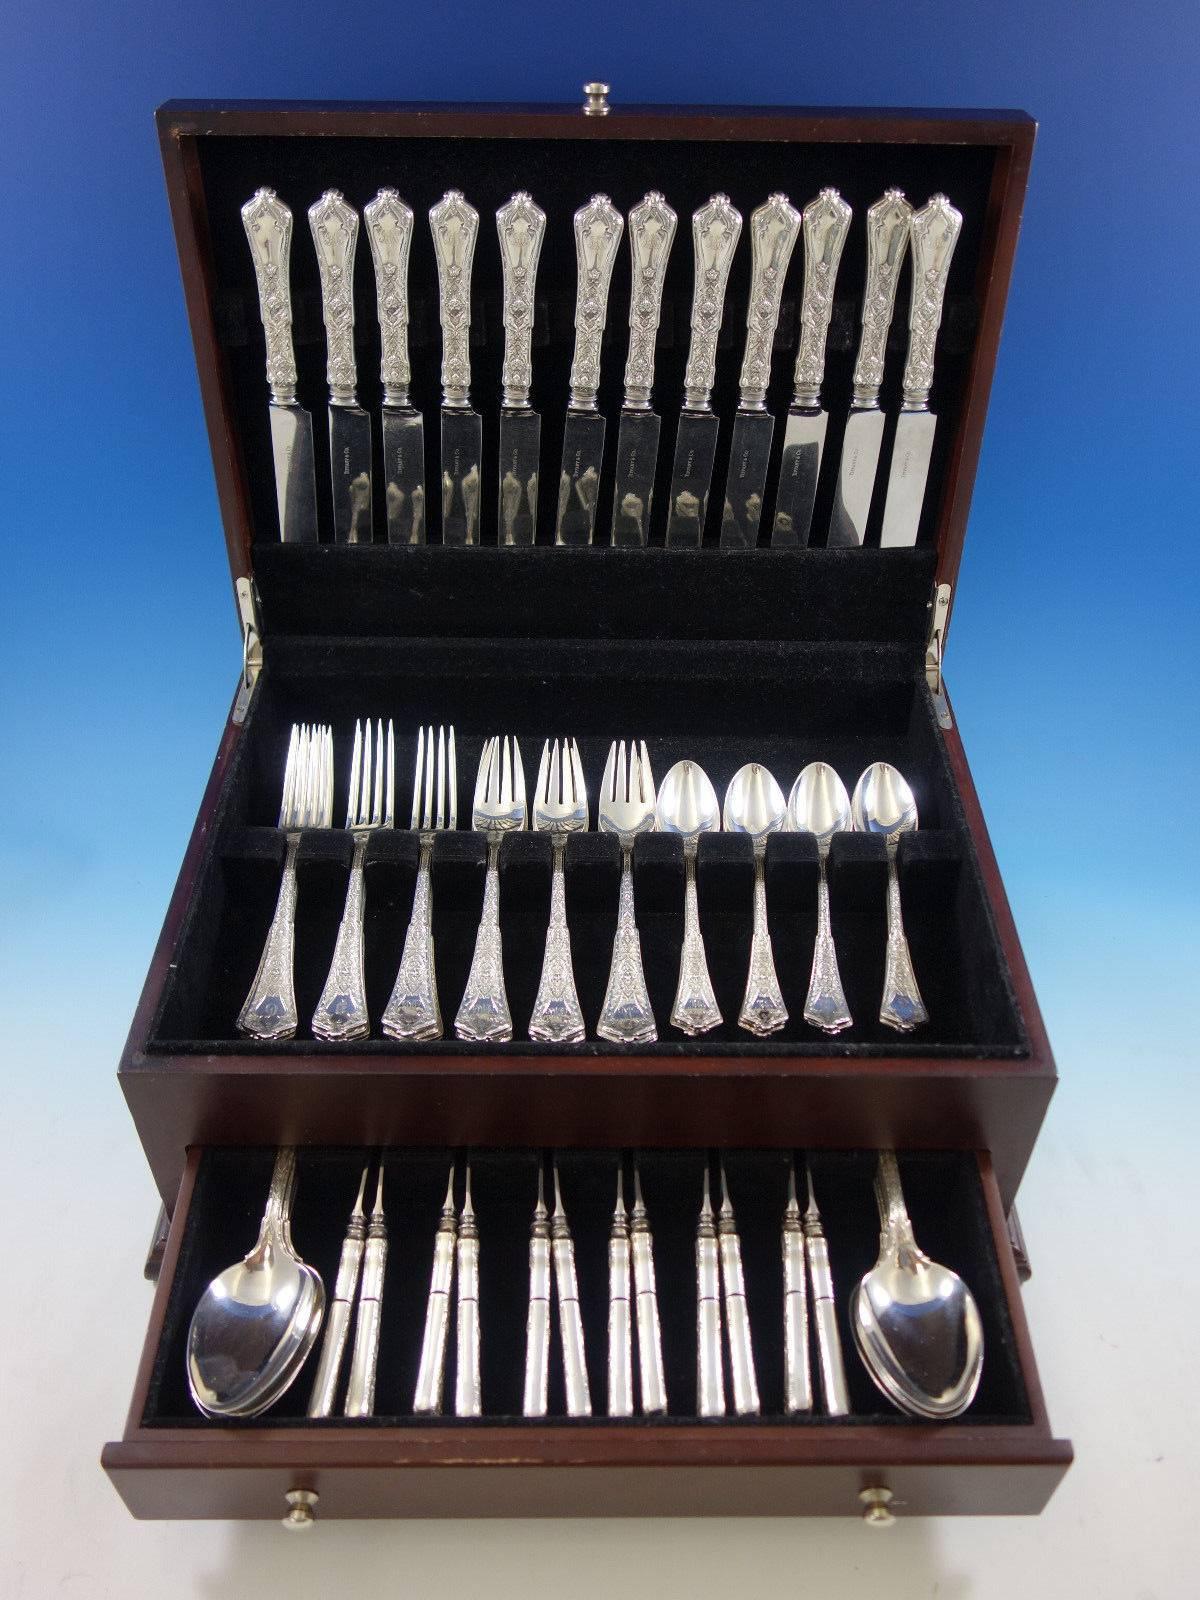 Persian by Tiffany & co. Sterling silver flatware set - 72 pieces. This set includes 

12 knives, 9 1/4